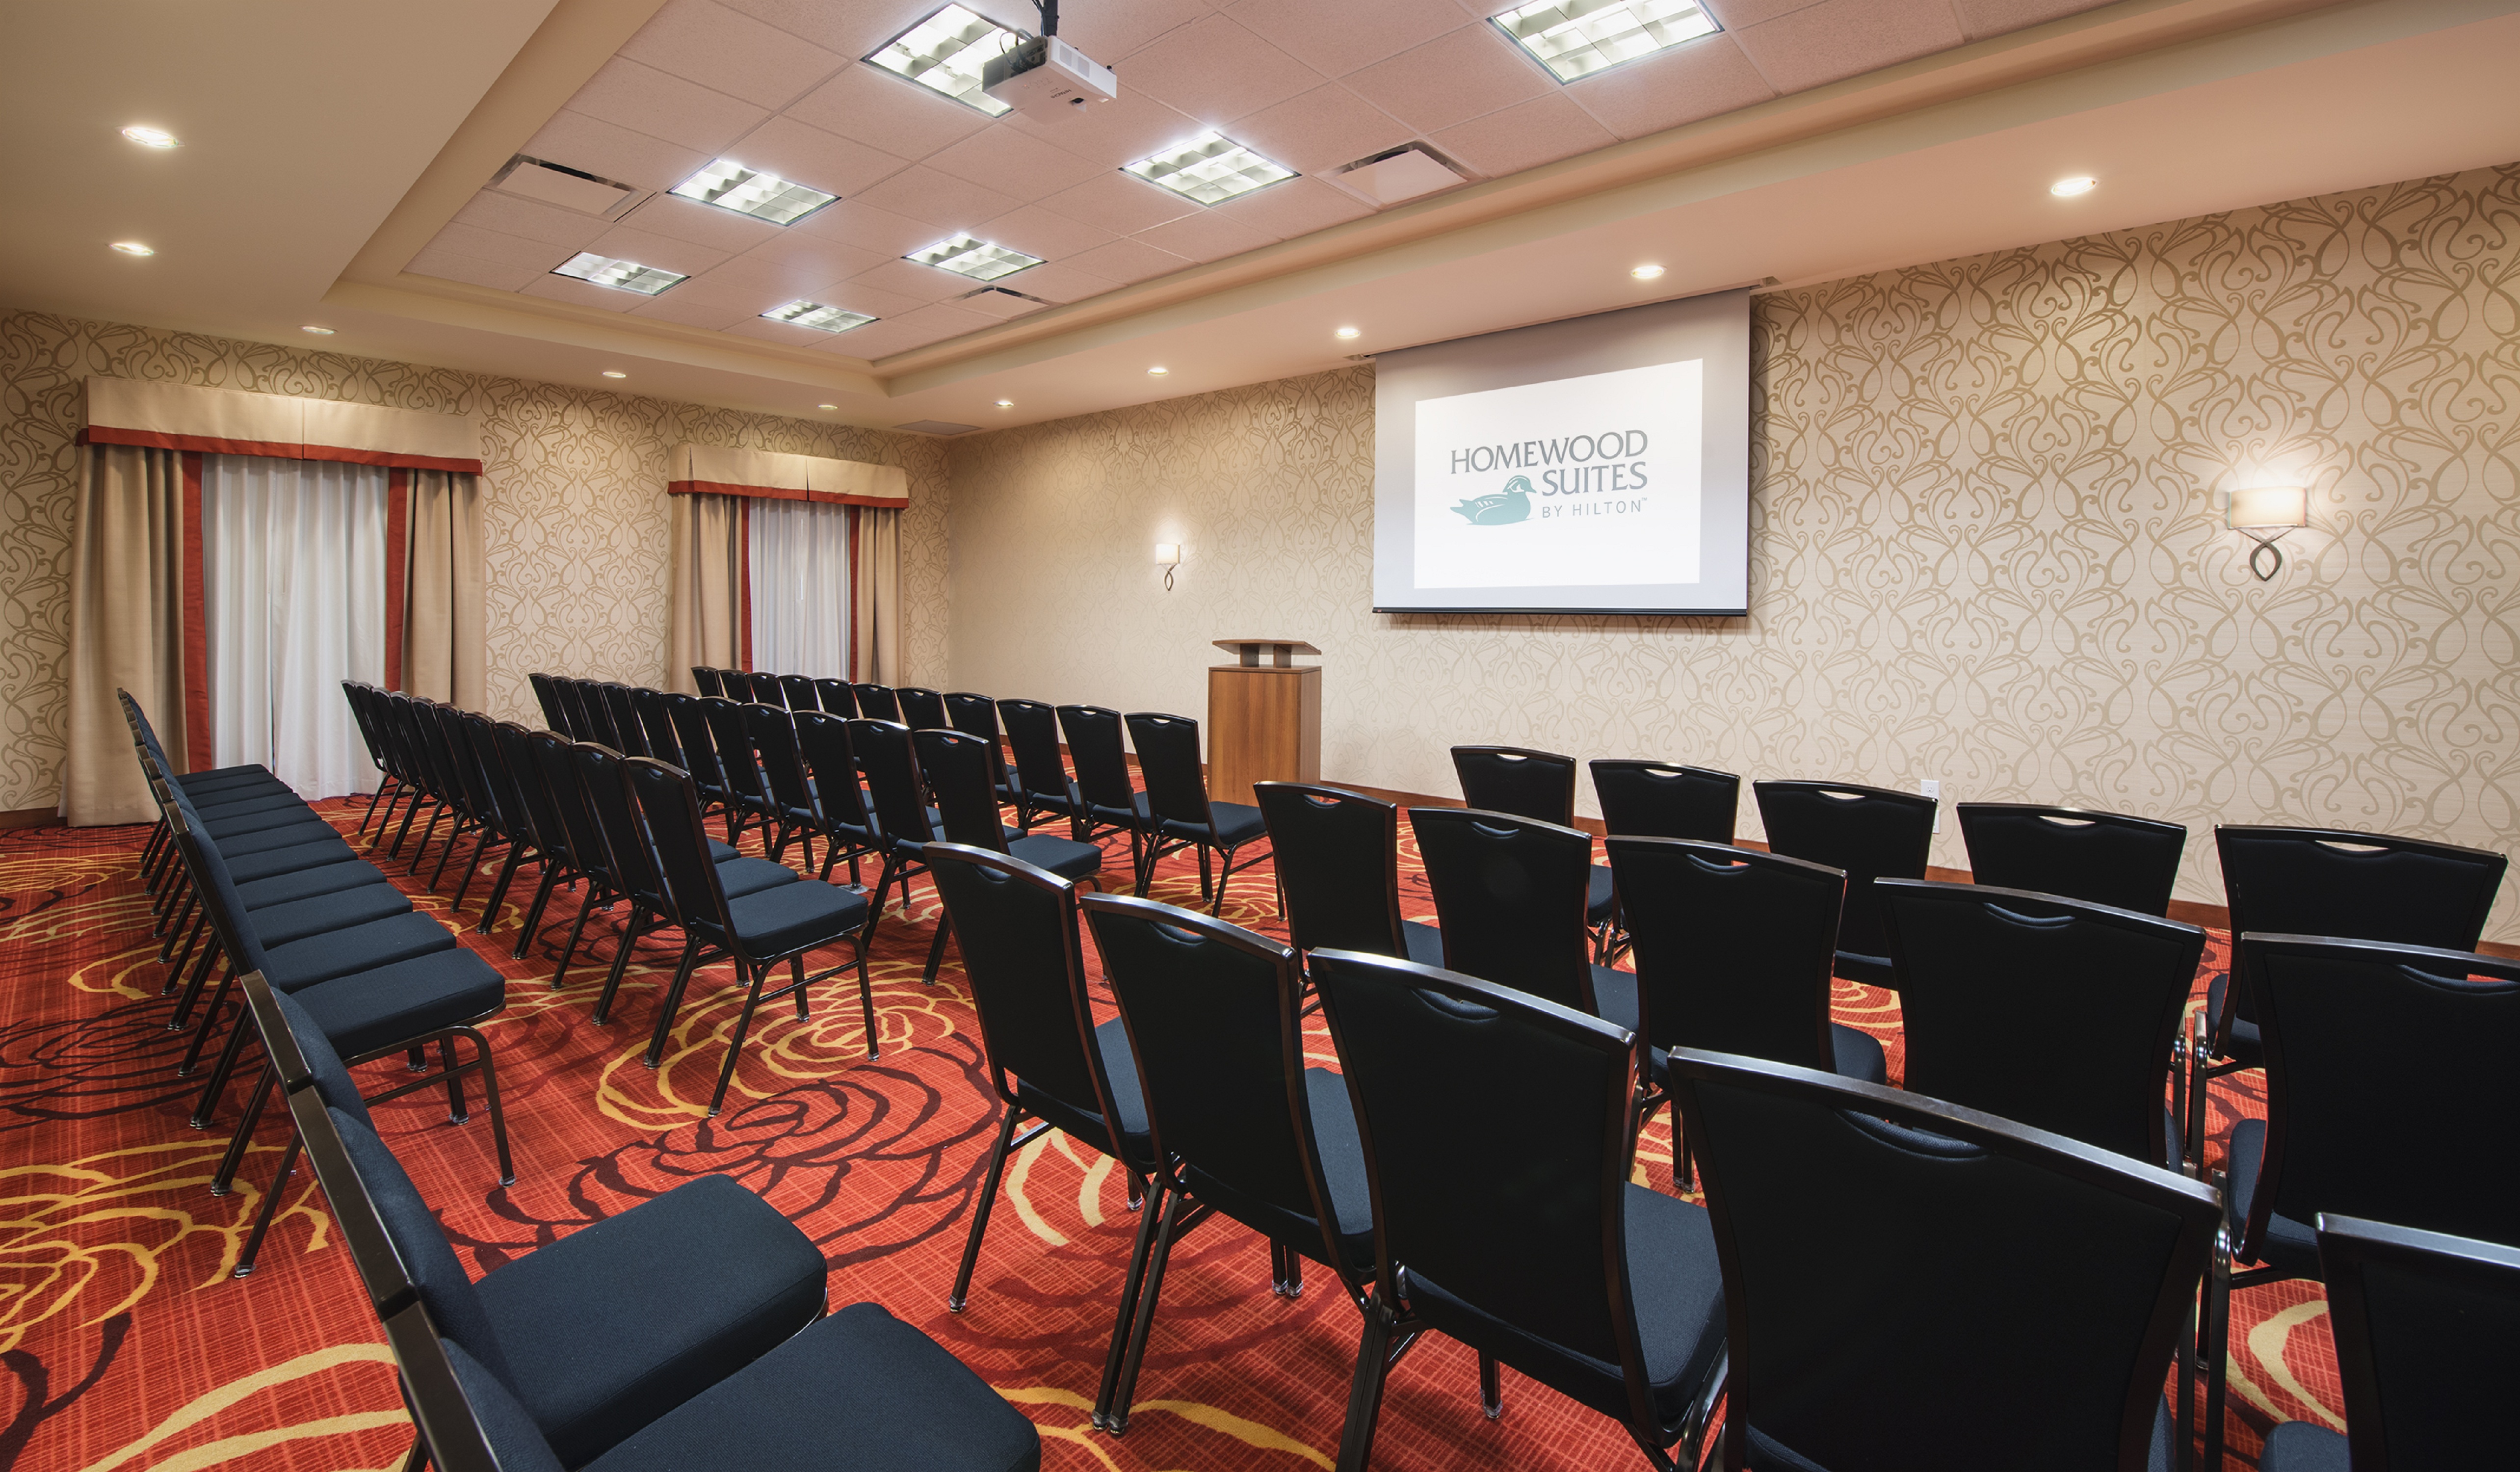 Meeting Room Arranged Theater Style With Chairs Facing Projector Screen and Podium